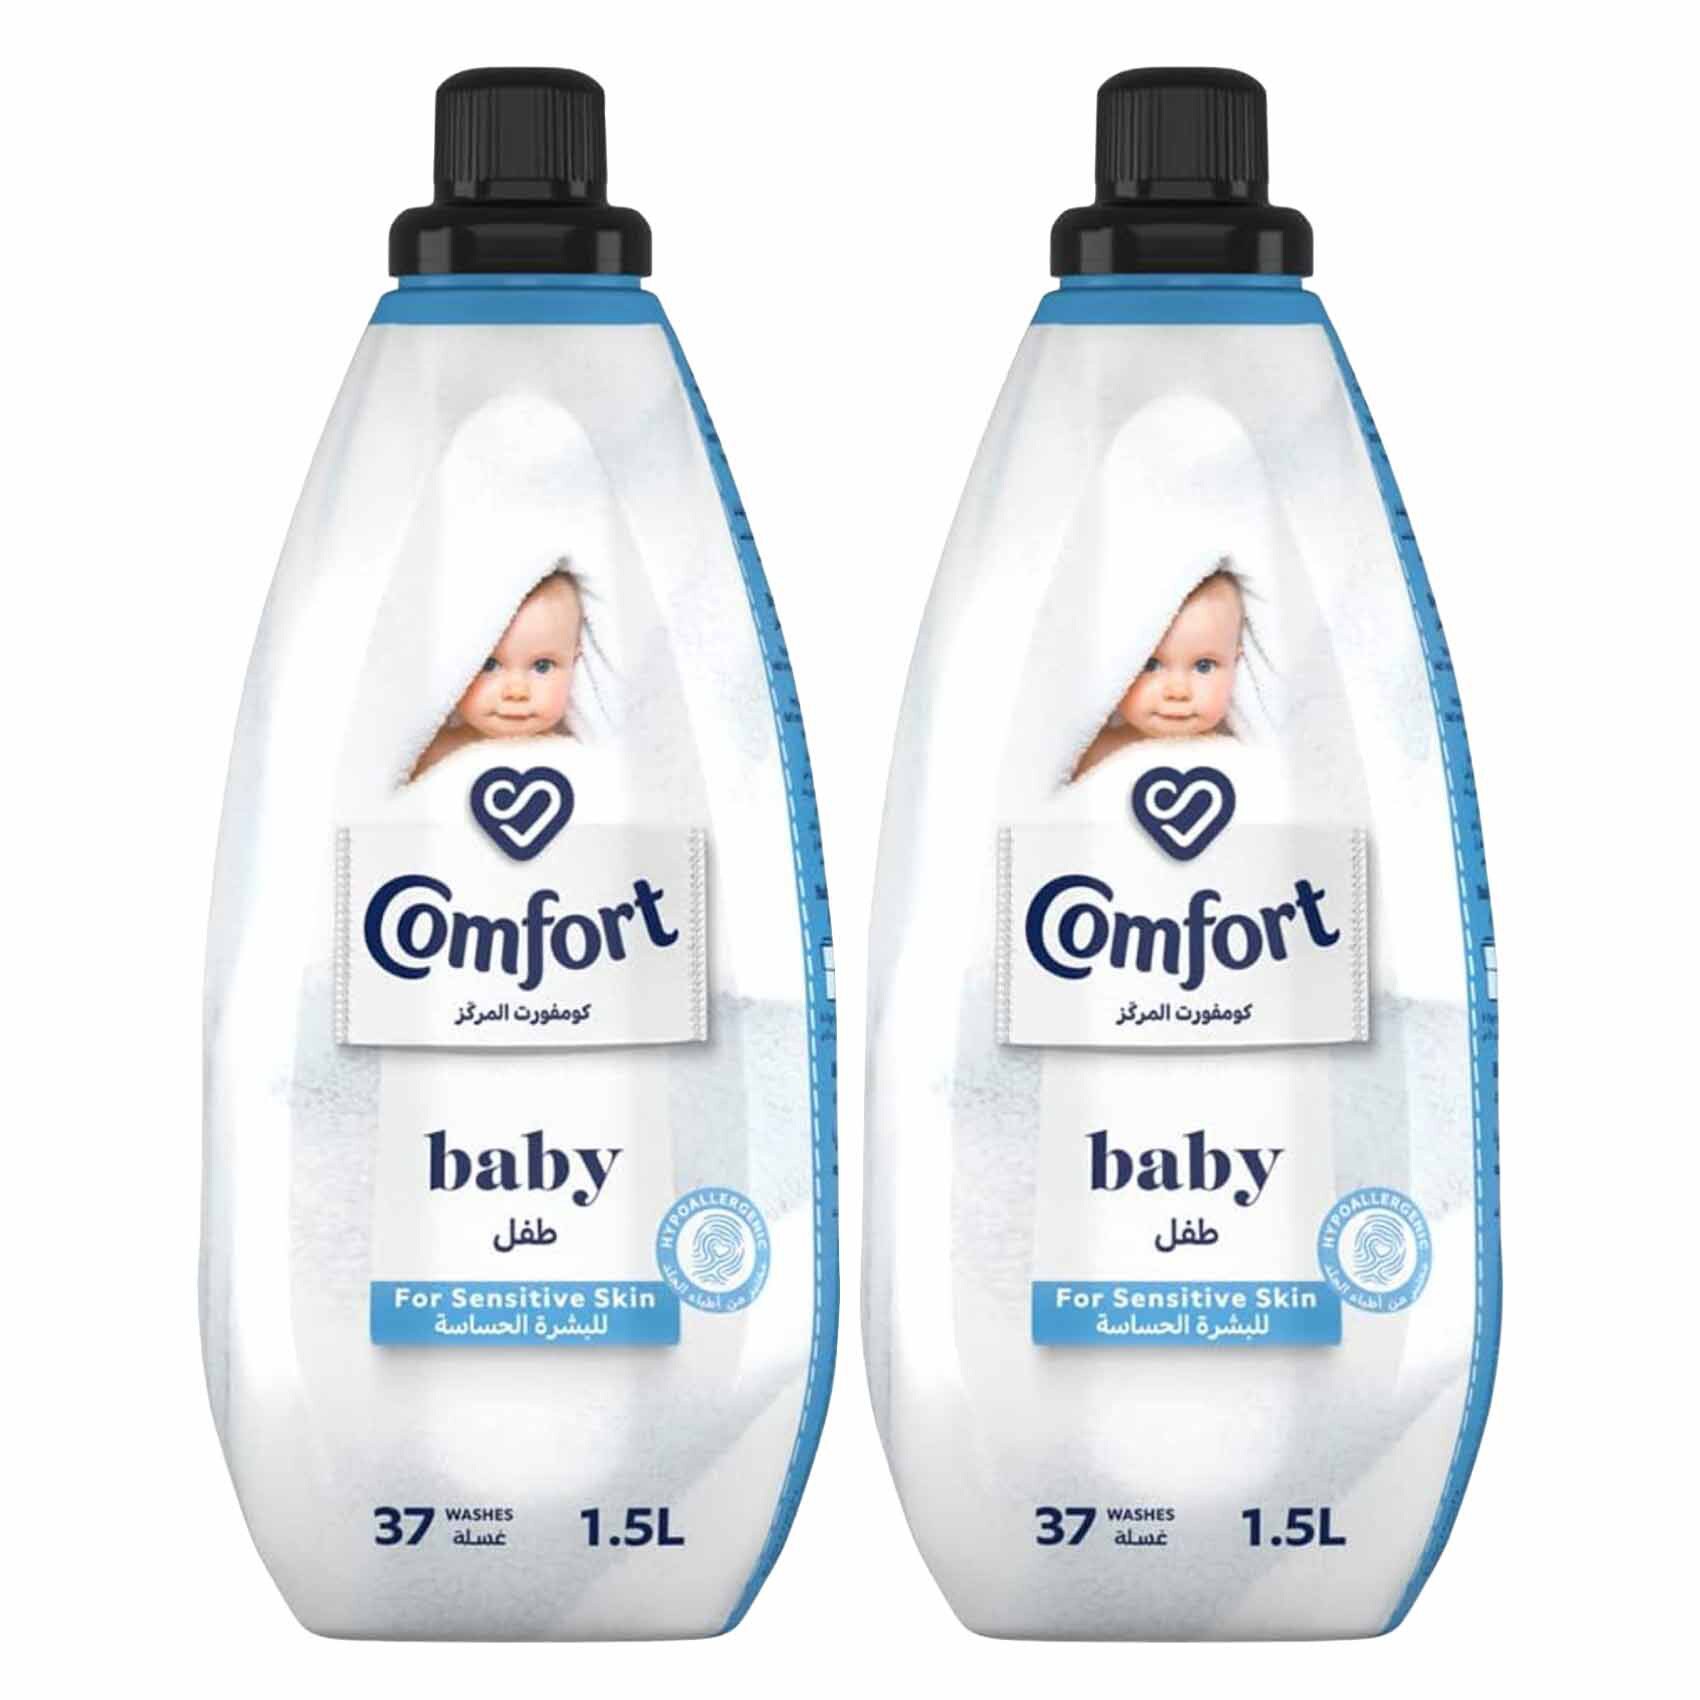 Buy Comfort Concentrated Fabric Softener For Baby 1.5L x Pack of 2